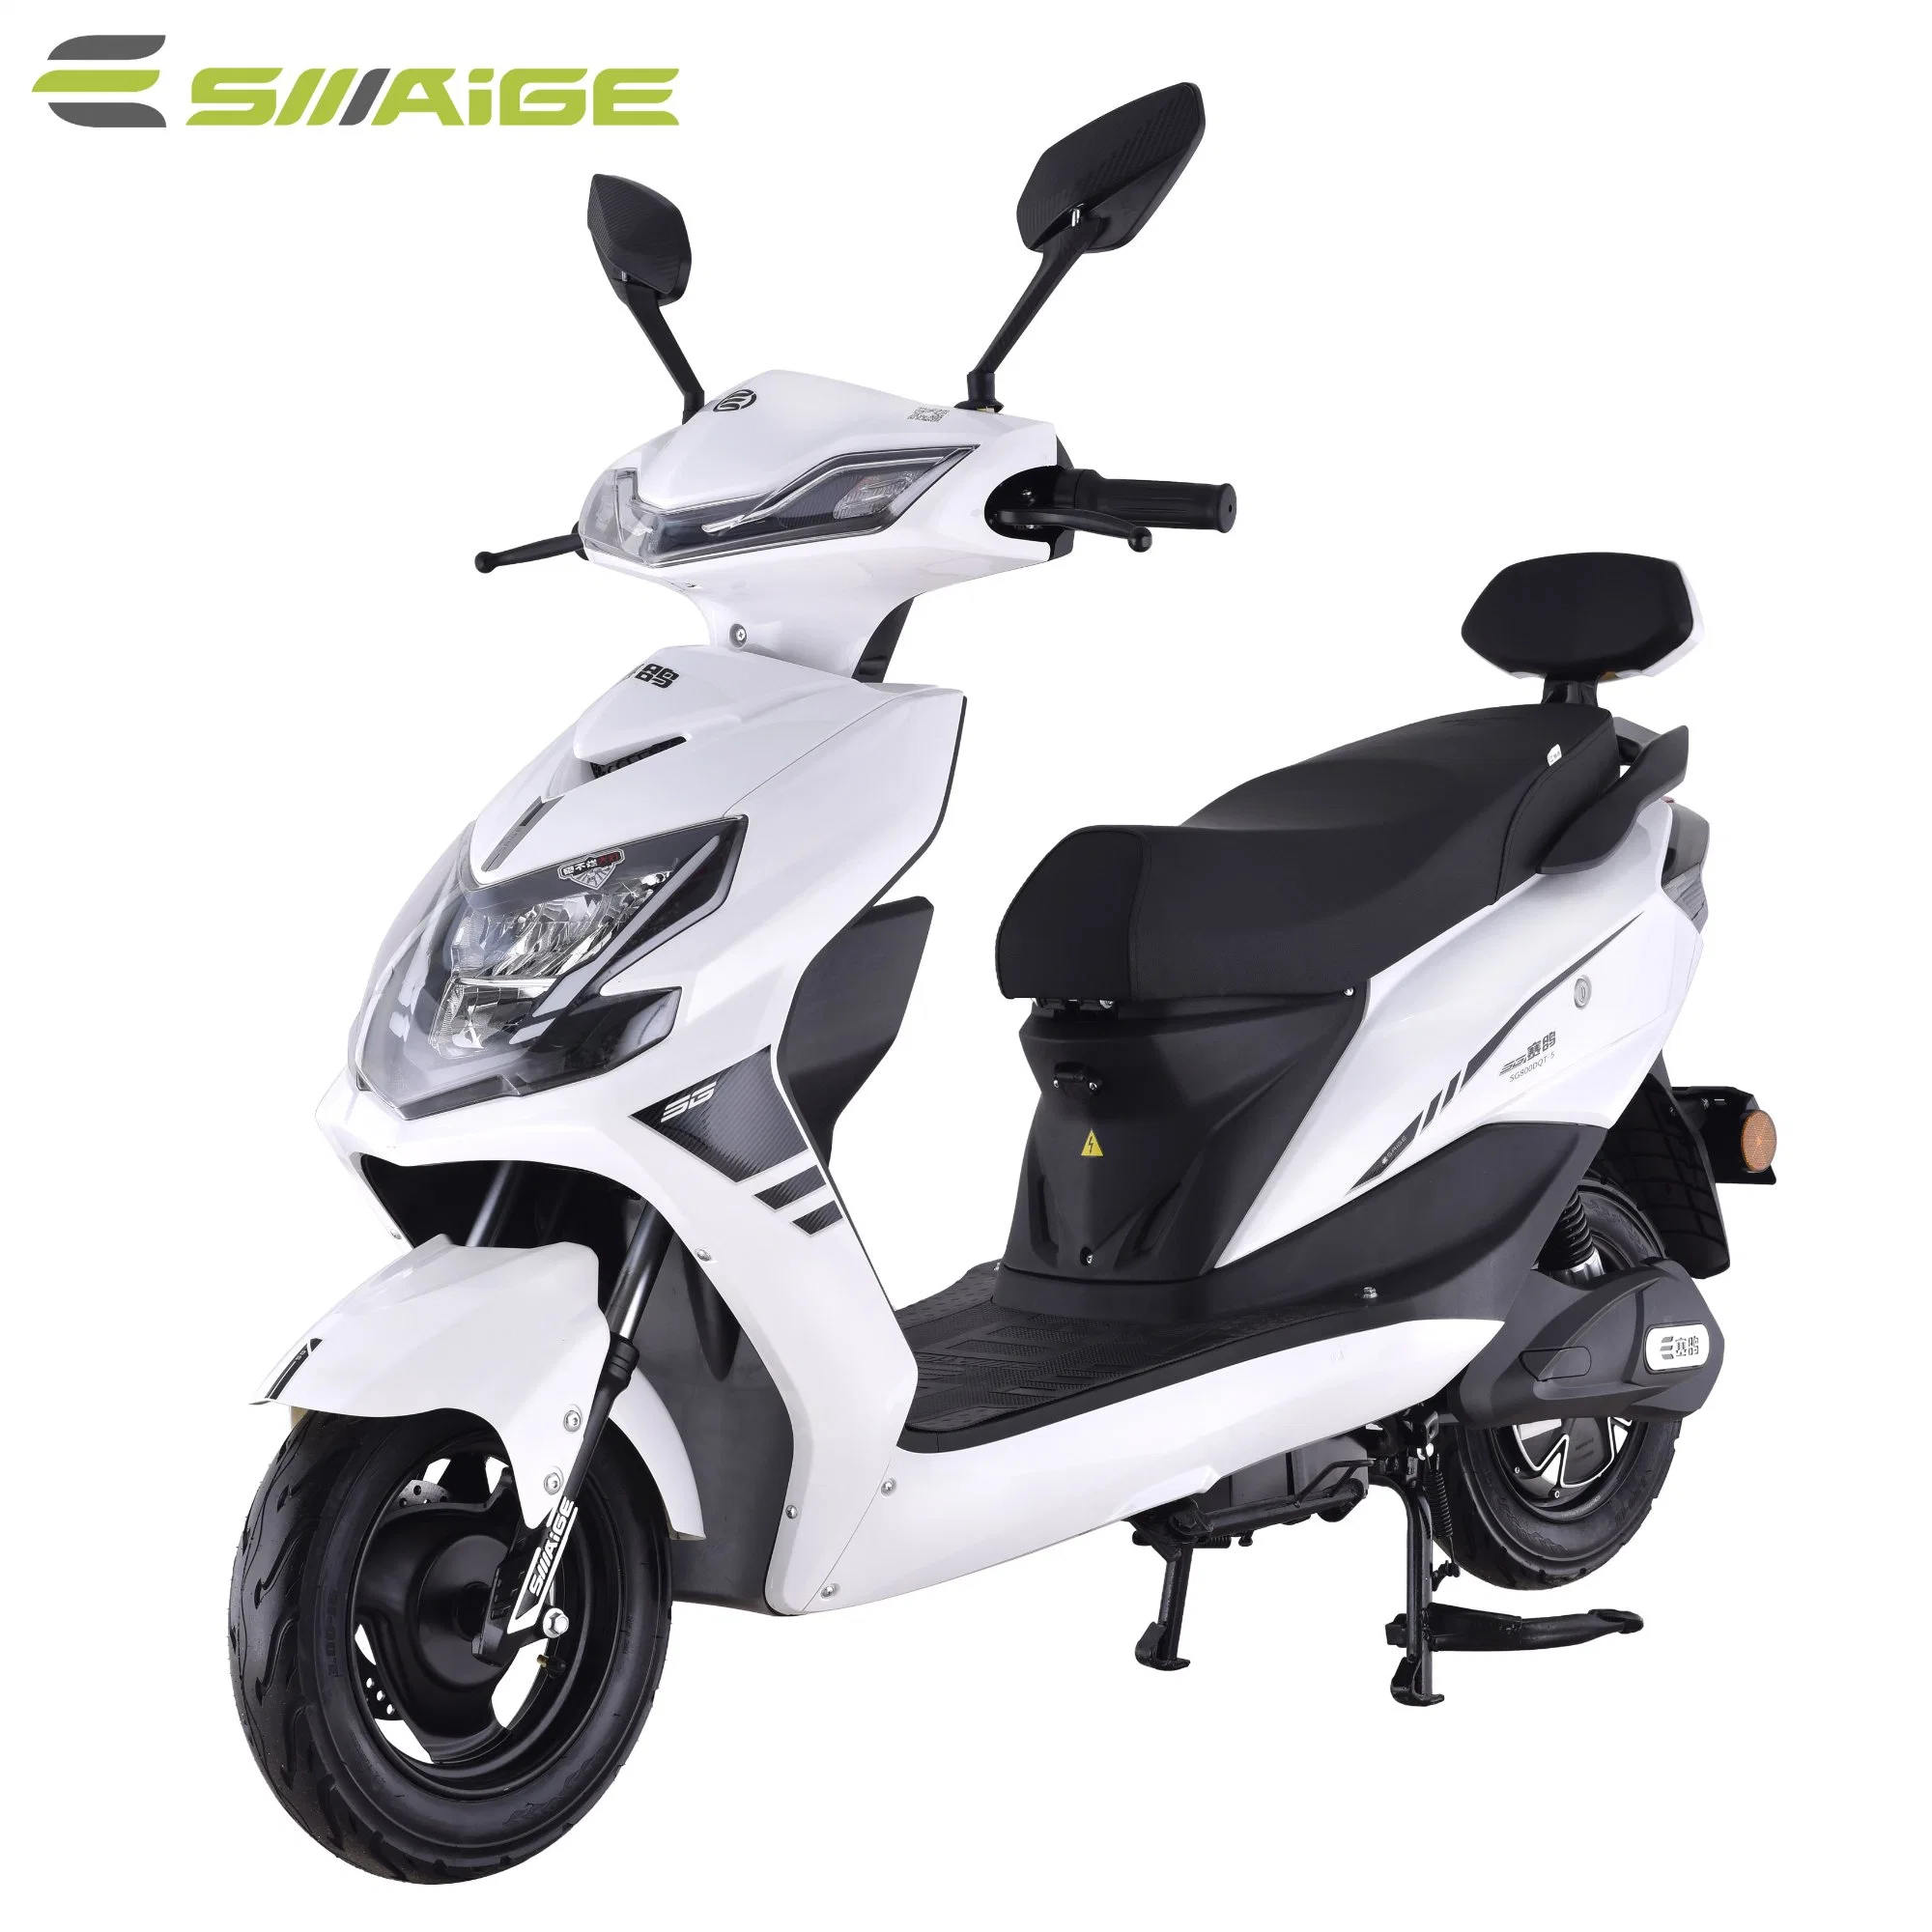 800W Electric Motor Motorcycle Saige EEC Certificate CKD Electric Vehicle Without Battery